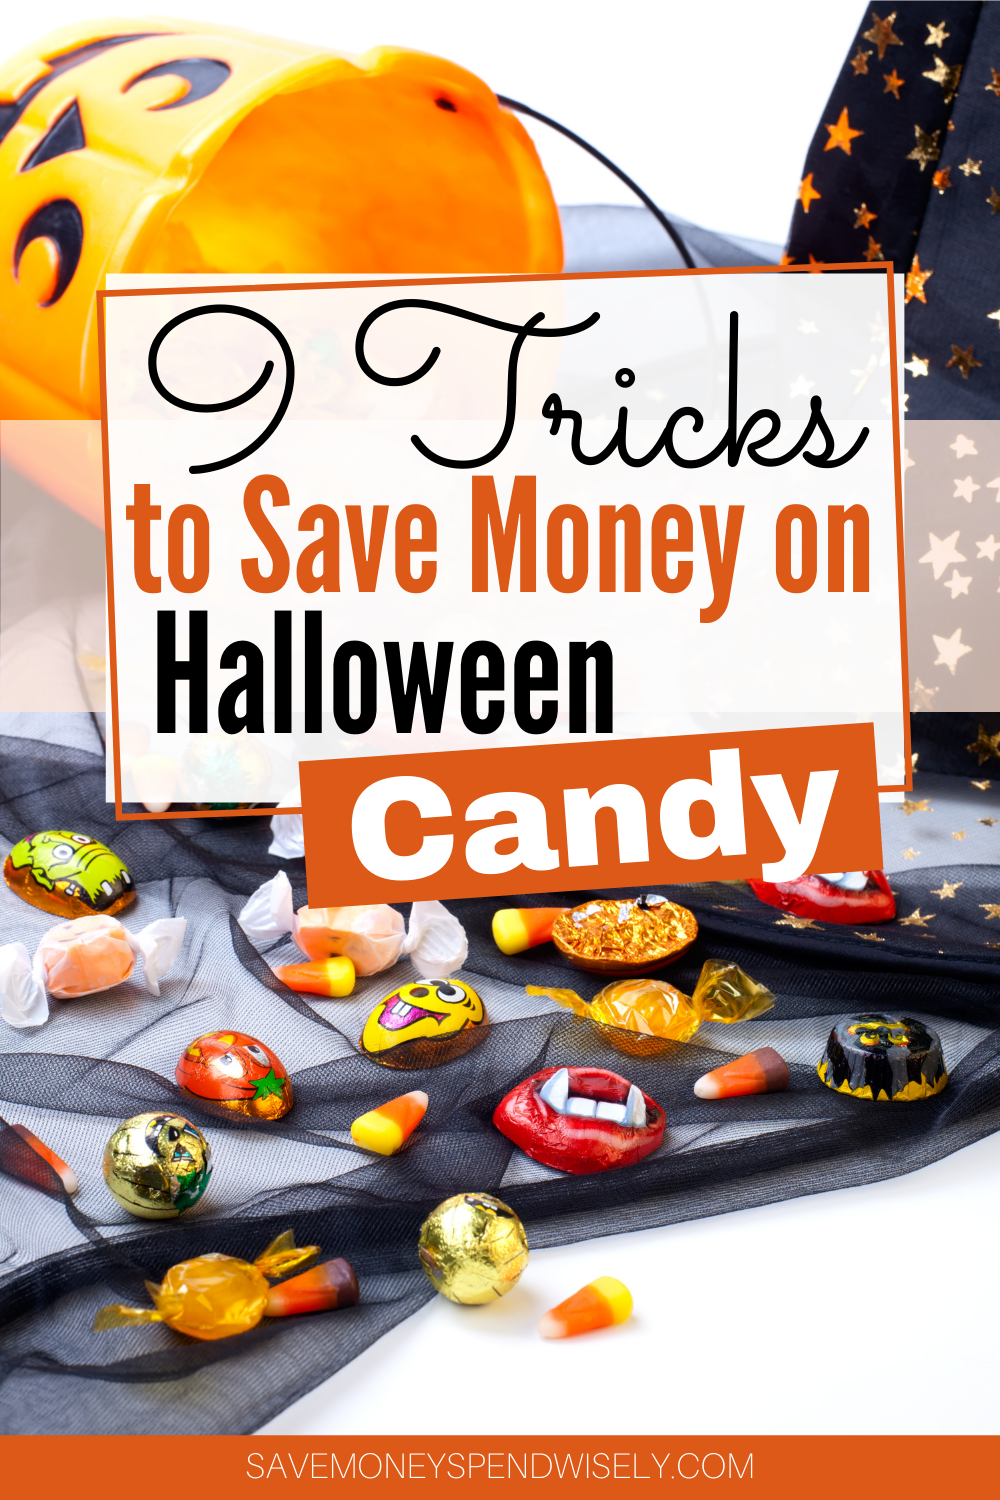 Tips to Save Money on Halloween Candy